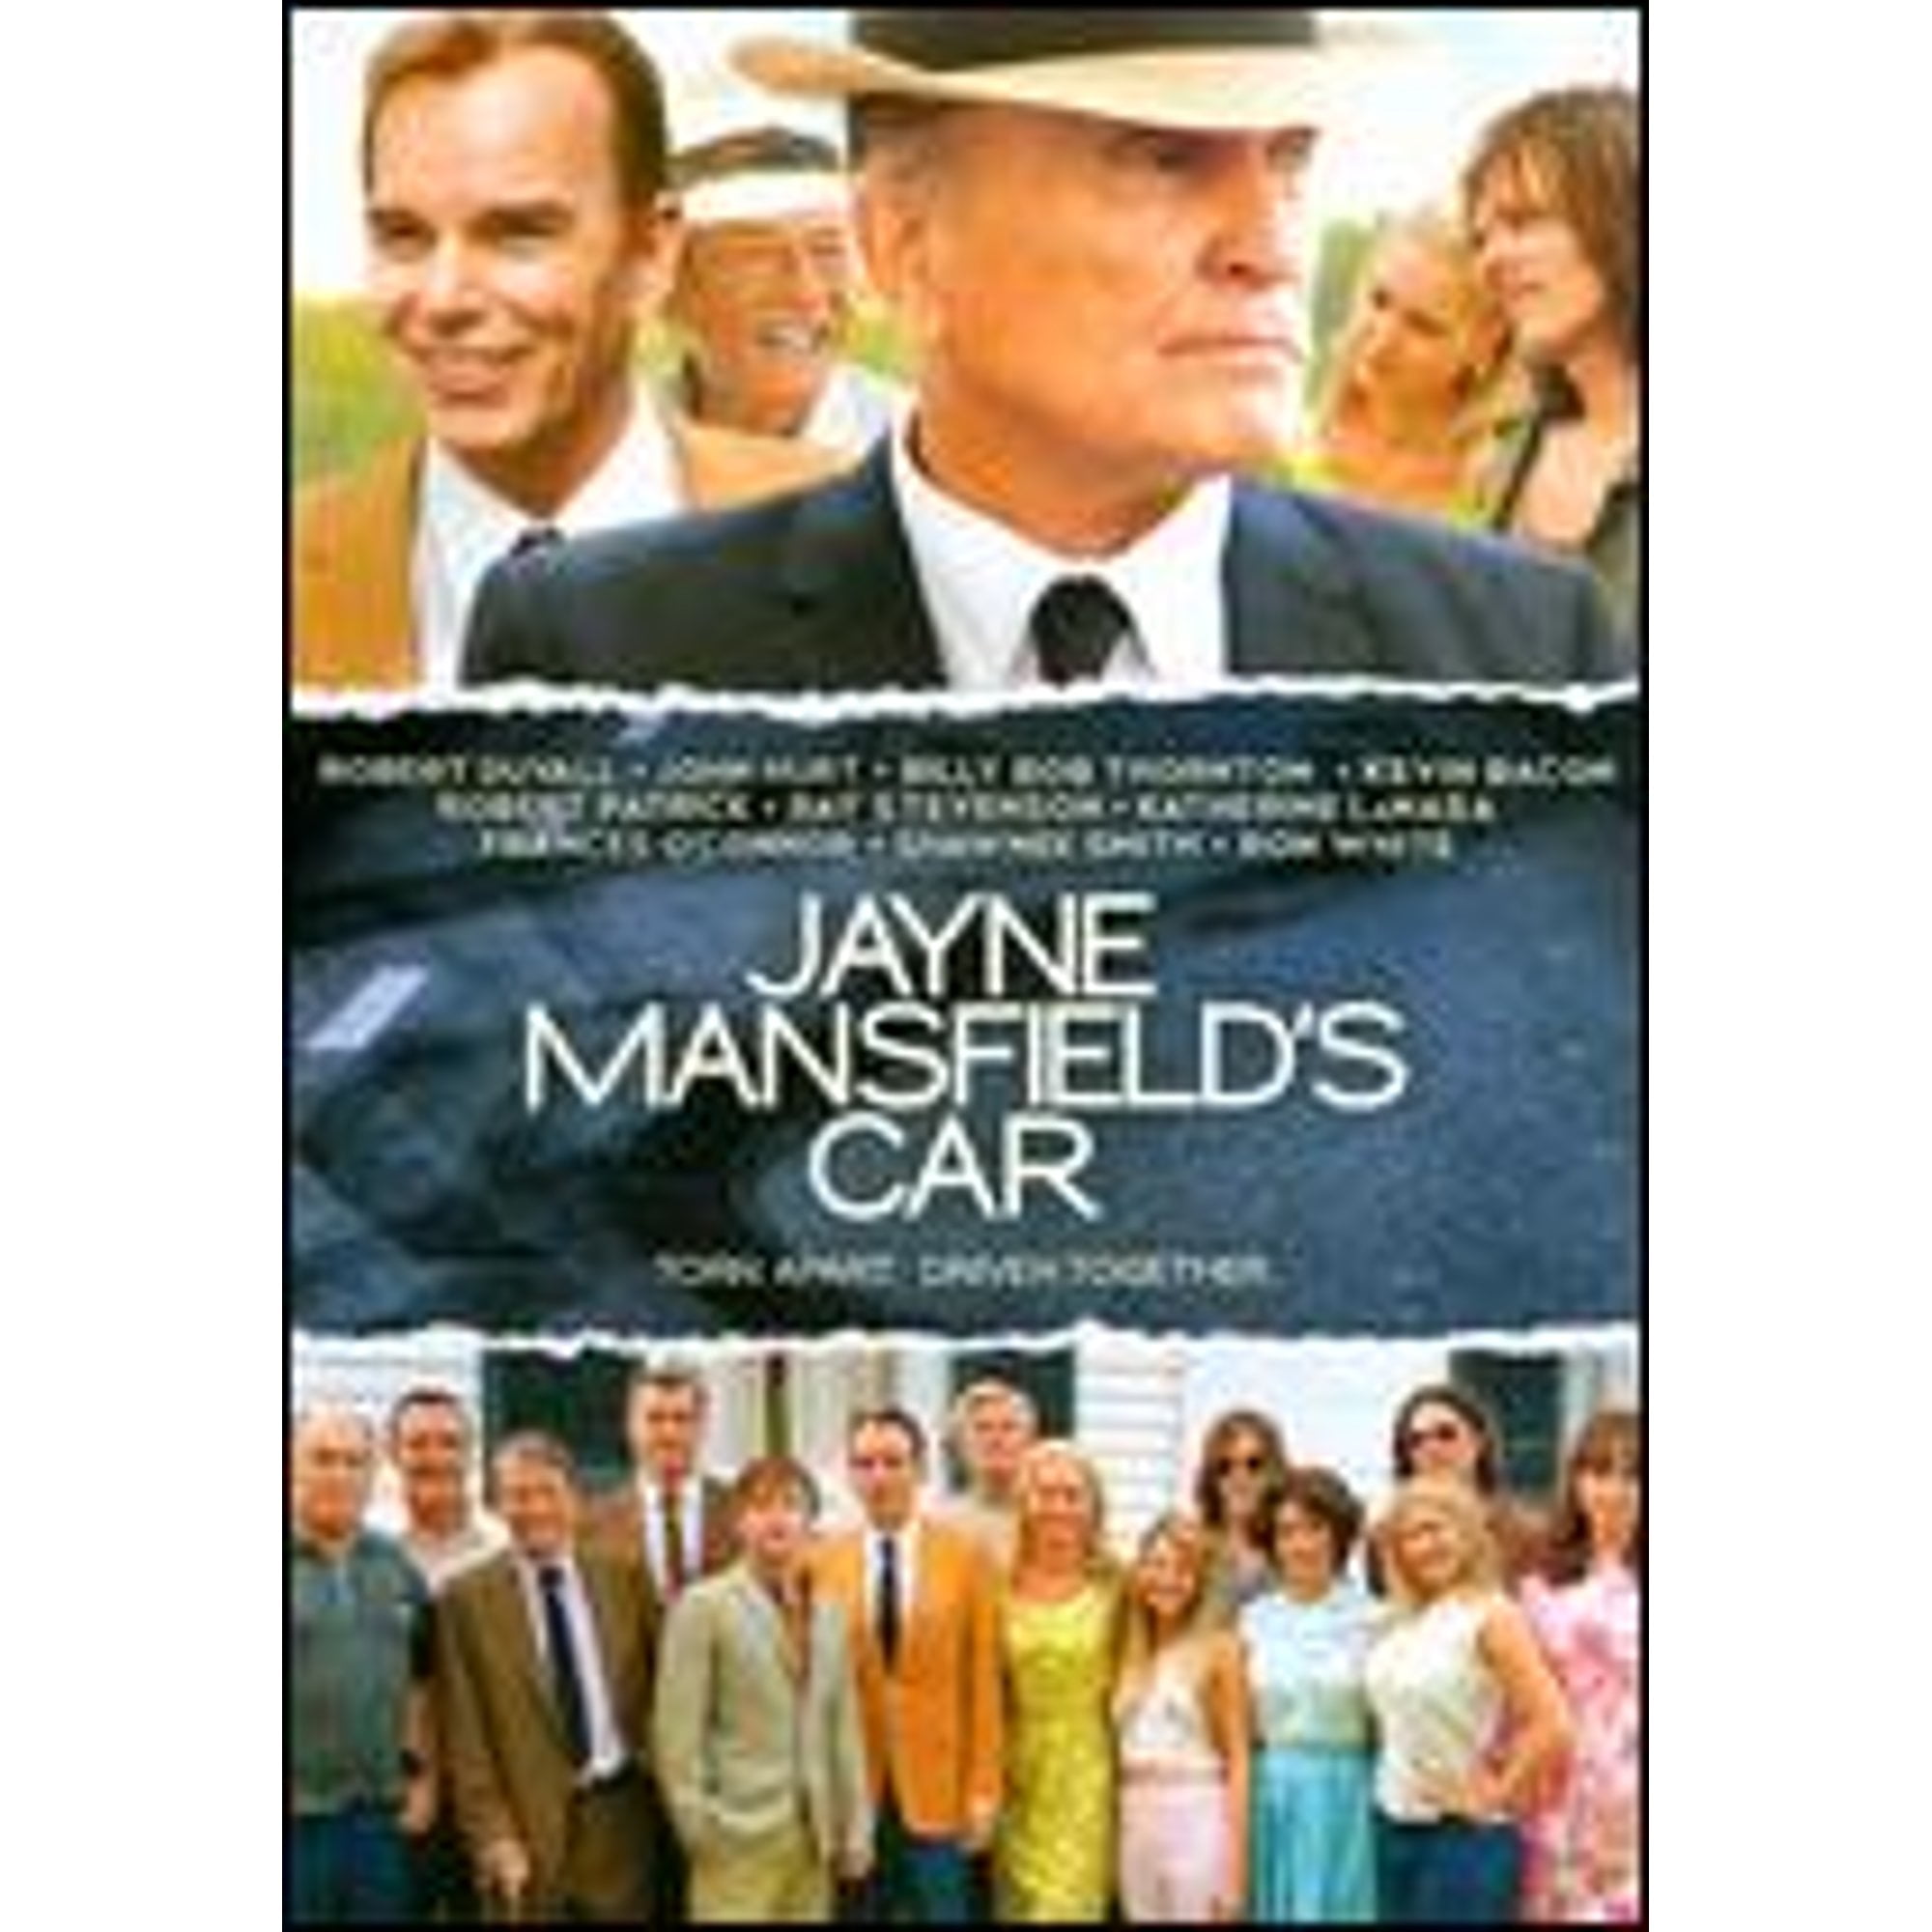 Pre-Owned Jayne Mansfield's Car (DVD 0013132602264) directed by Billy Bob Thornton